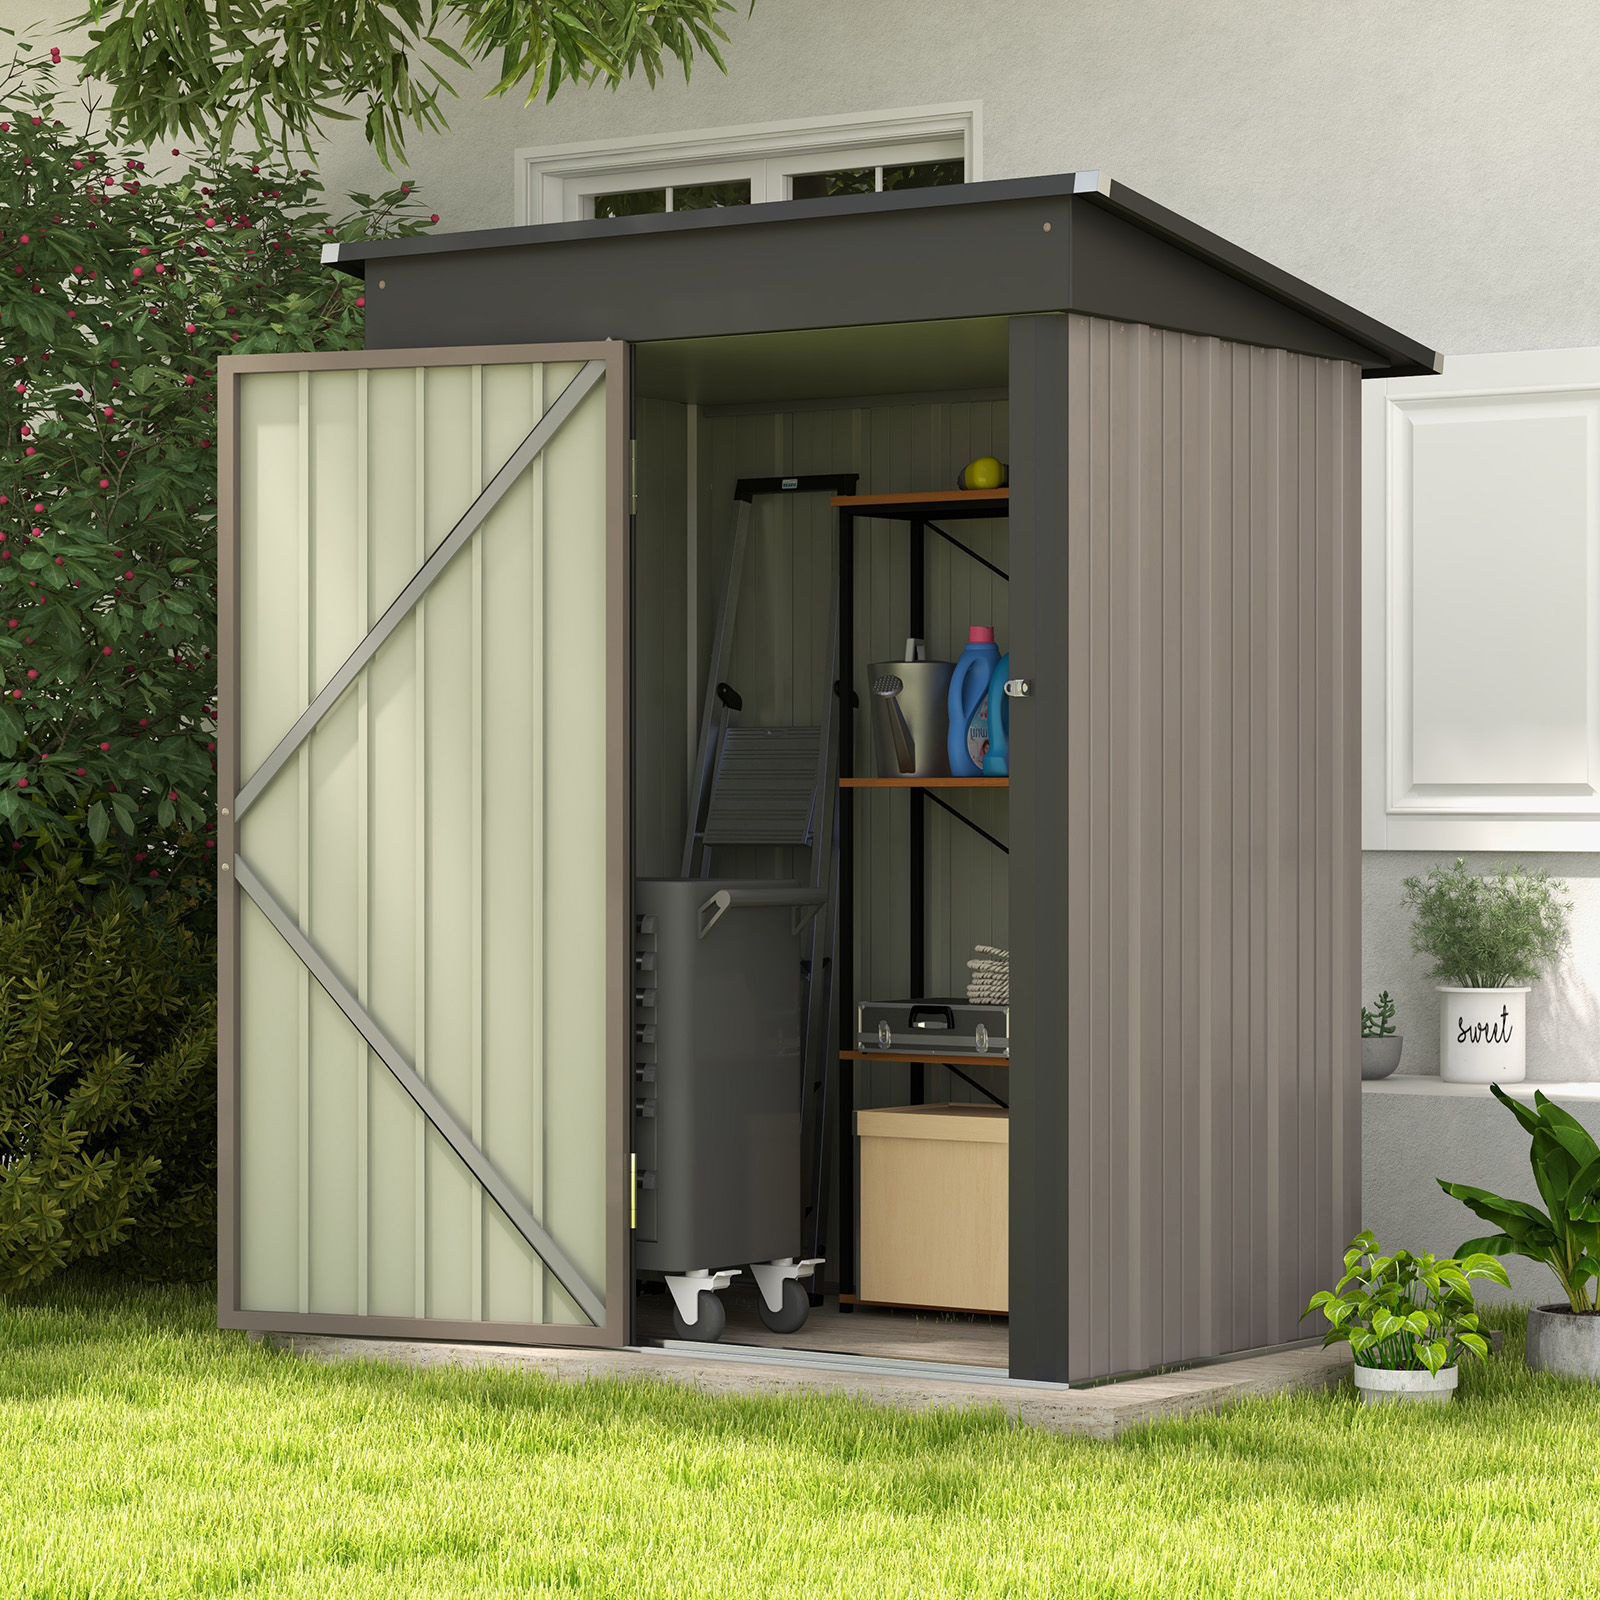 Patiowell Classic 5' x 3' Outdoor Storage Shed Metal Shed with Sloping Roof and Lockable Door, Brown - image 3 of 13